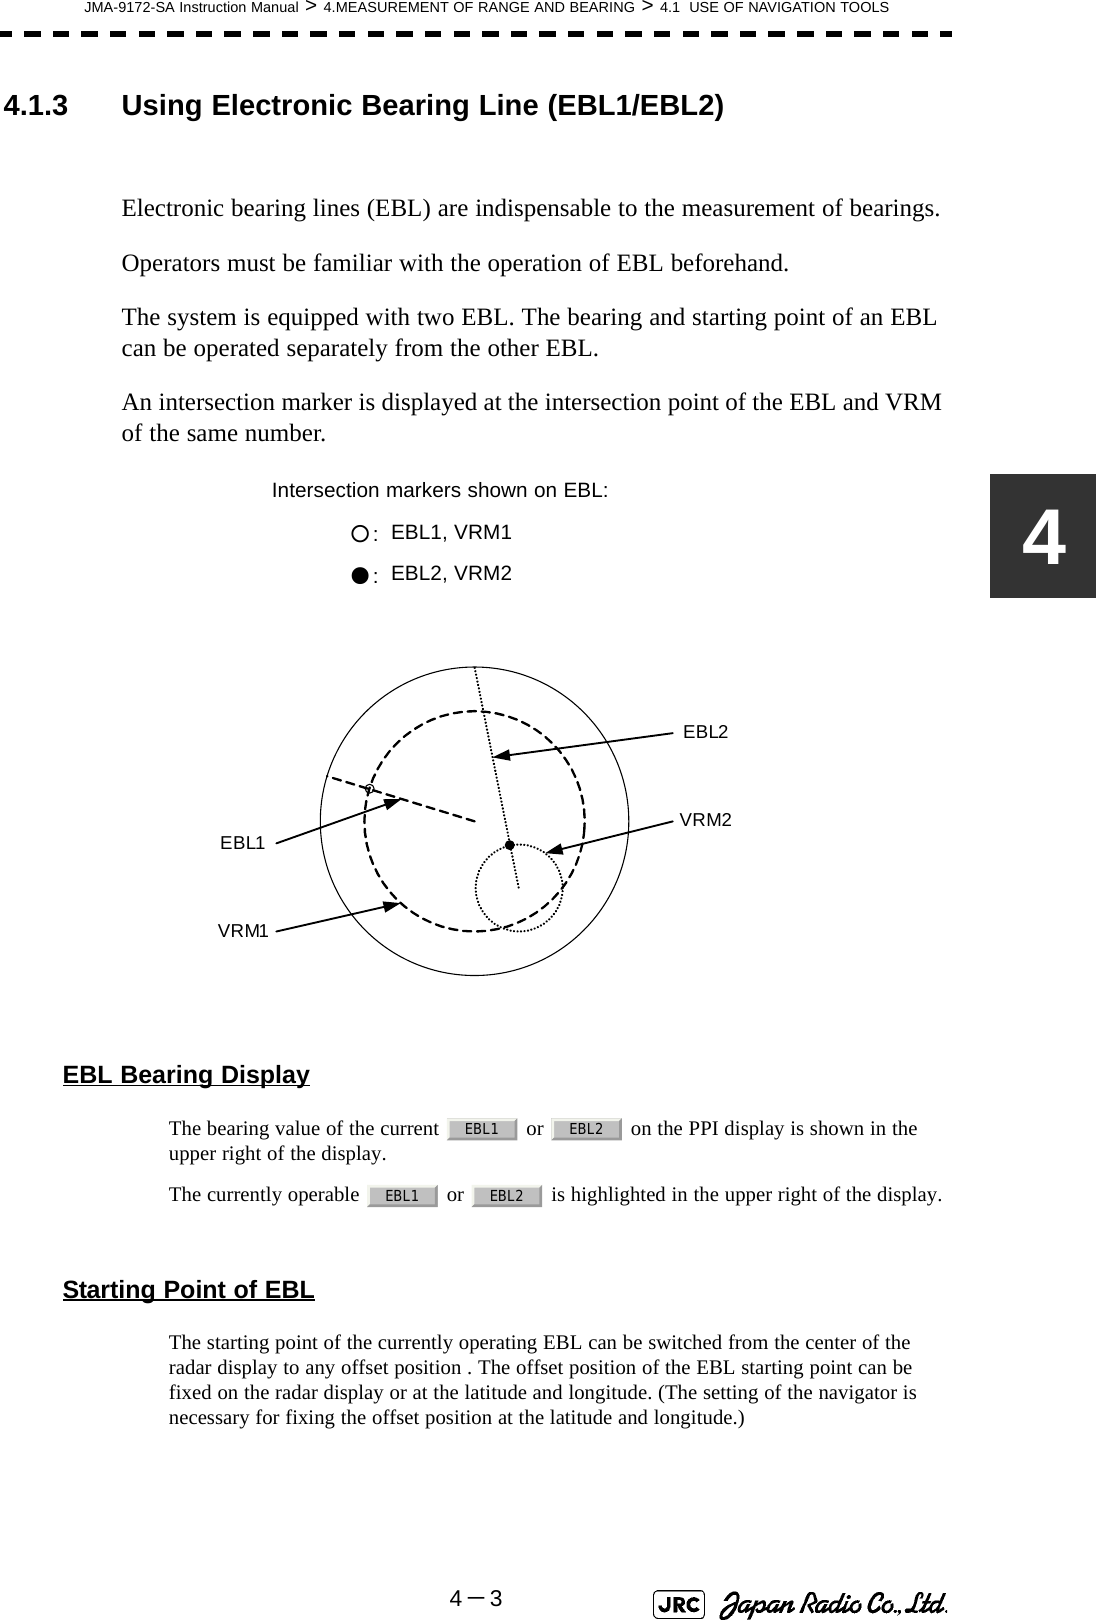 JMA-9172-SA Instruction Manual &gt; 4.MEASUREMENT OF RANGE AND BEARING &gt; 4.1  USE OF NAVIGATION TOOLS4－344.1.3 Using Electronic Bearing Line (EBL1/EBL2)Electronic bearing lines (EBL) are indispensable to the measurement of bearings.Operators must be familiar with the operation of EBL beforehand.The system is equipped with two EBL. The bearing and starting point of an EBL can be operated separately from the other EBL.An intersection marker is displayed at the intersection point of the EBL and VRM of the same number.EBL Bearing DisplayThe bearing value of the current   or   on the PPI display is shown in the upper right of the display. The currently operable   or   is highlighted in the upper right of the display.Starting Point of EBLThe starting point of the currently operating EBL can be switched from the center of the radar display to any offset position . The offset position of the EBL starting point can be fixed on the radar display or at the latitude and longitude. (The setting of the navigator is necessary for fixing the offset position at the latitude and longitude.)Intersection markers shown on EBL:○:EBL1, VRM1●:EBL2, VRM2VRM2EBL2VRM1EBL1EBL1 EBL2EBL1 EBL2